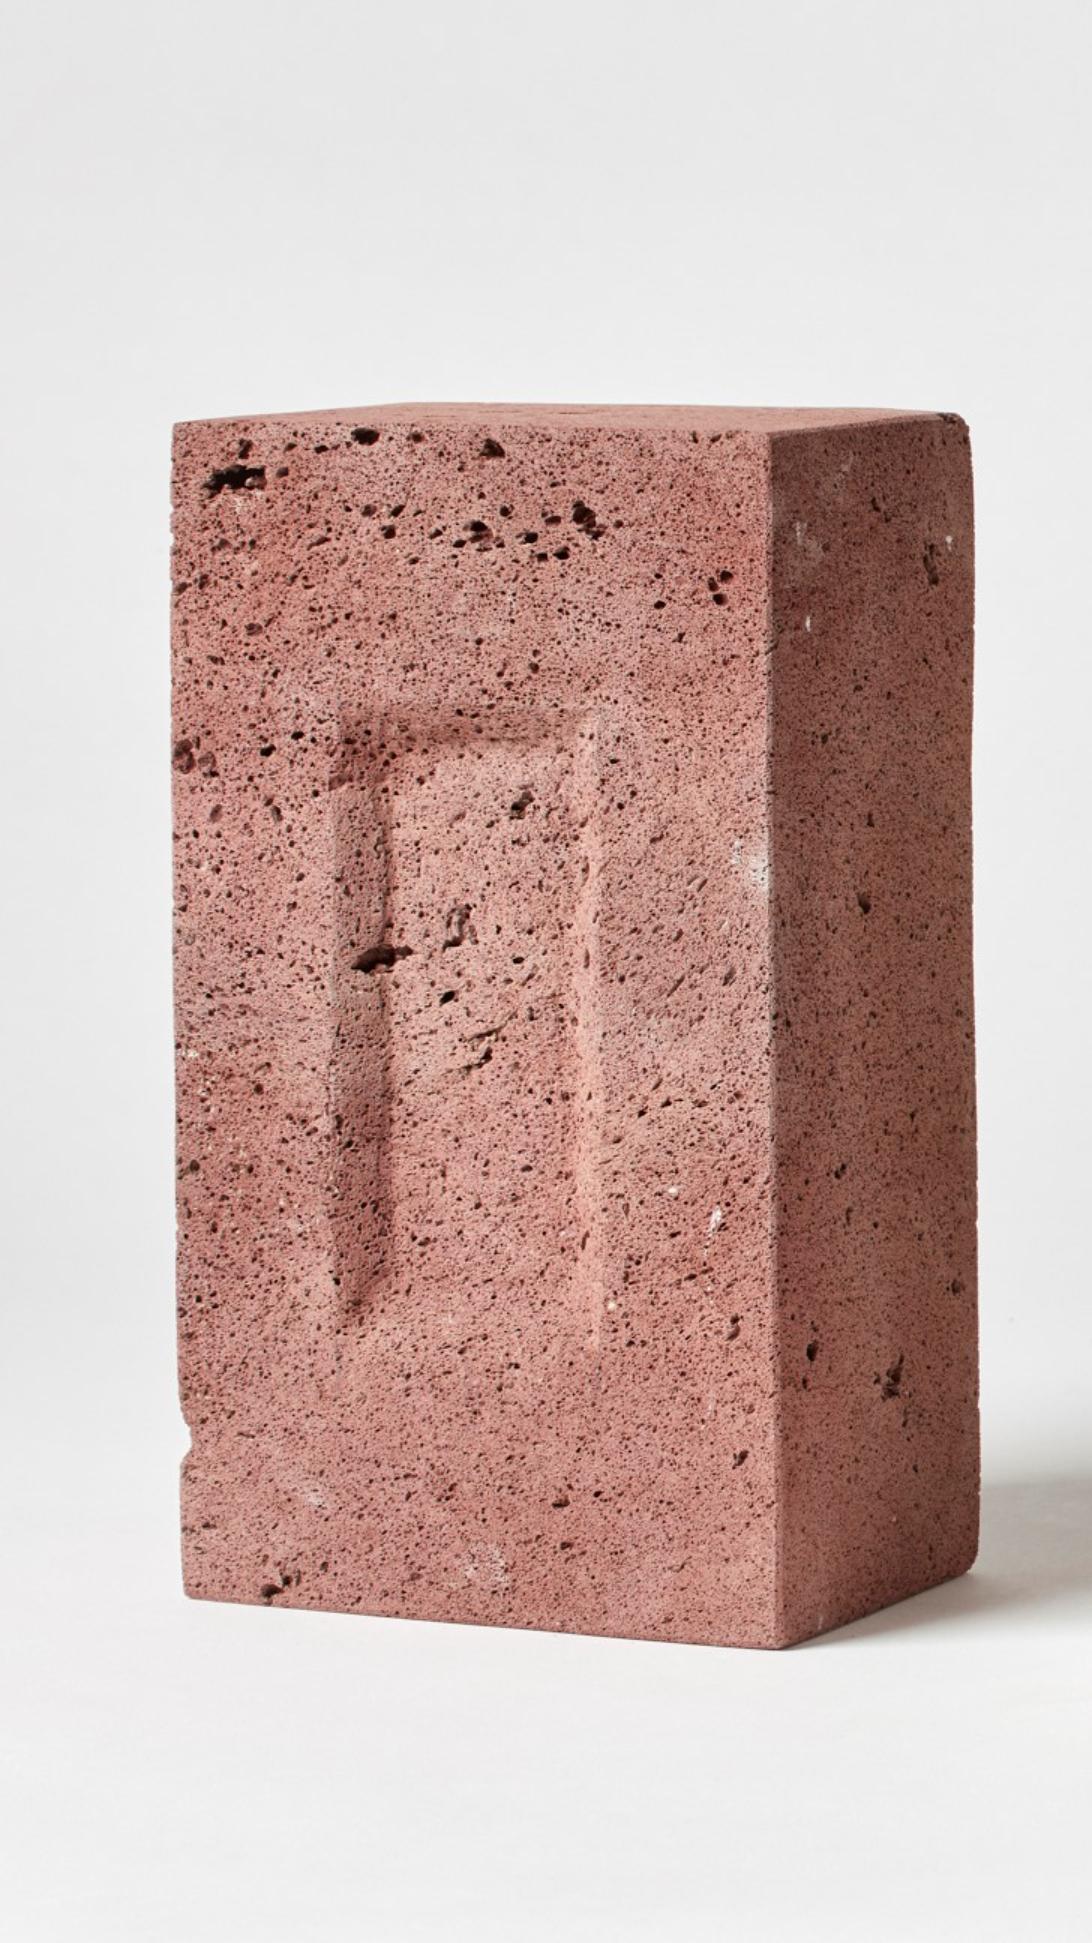 Brick by Estudio Rafael Freyre.
Dimensions: W 12.5 D 9 x H 23 cm. 
Materials: andes stones.
Also available: other finishes available.

The brick is a generic constructive element that constitutes part of the urban imaginary. In Peru, moreover,